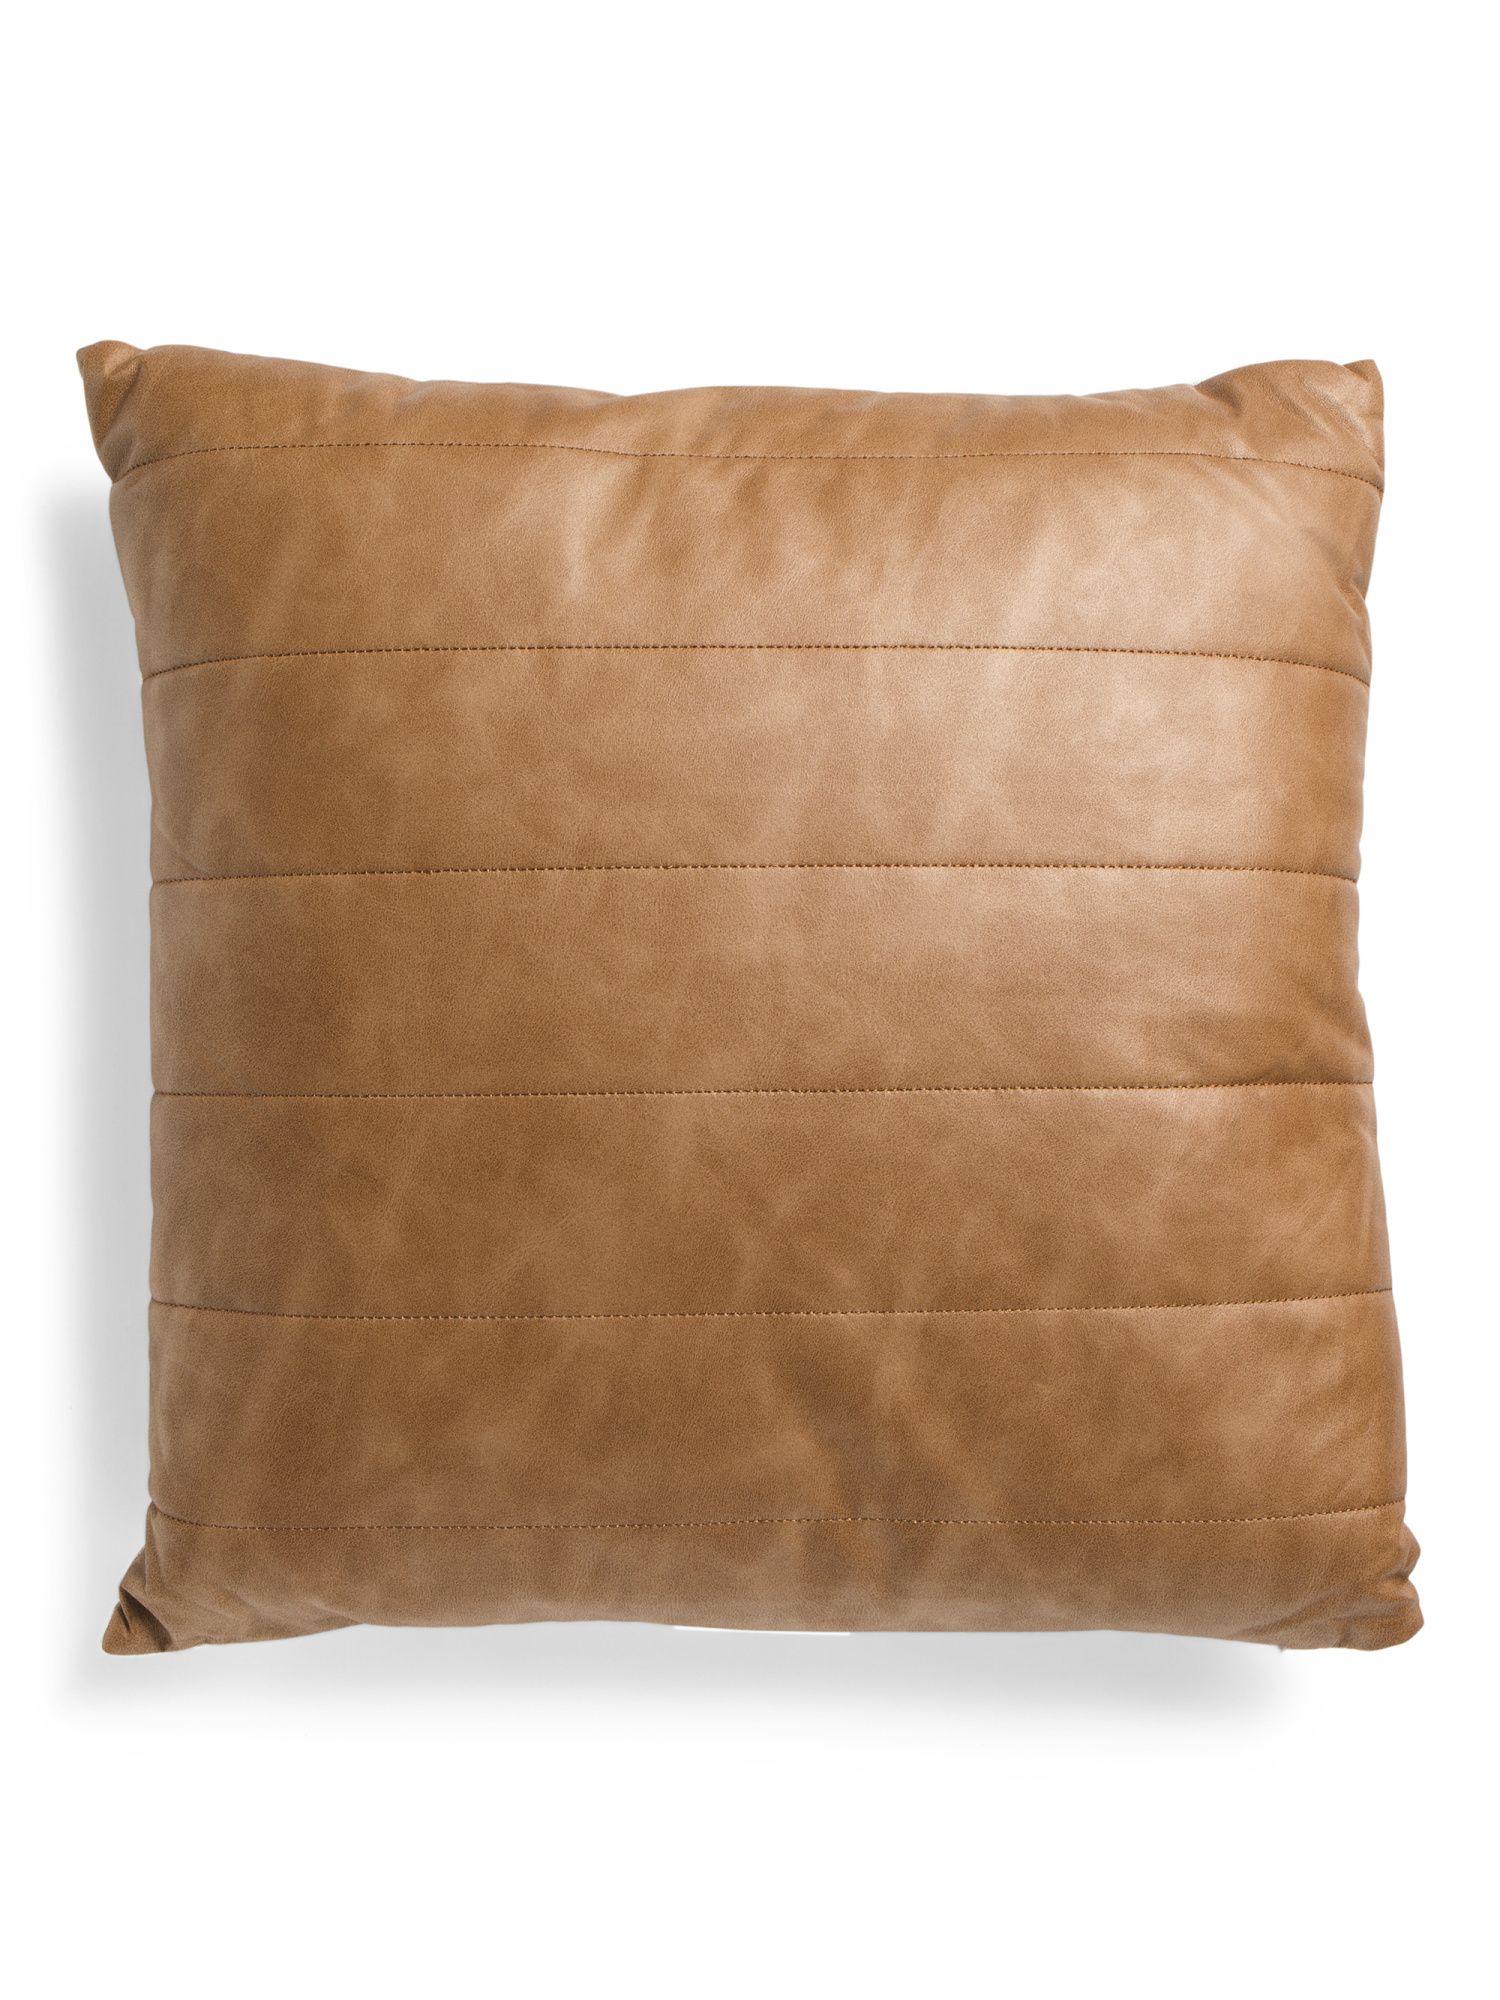 20x20 Faux Leather Quilted Pillow | TJ Maxx